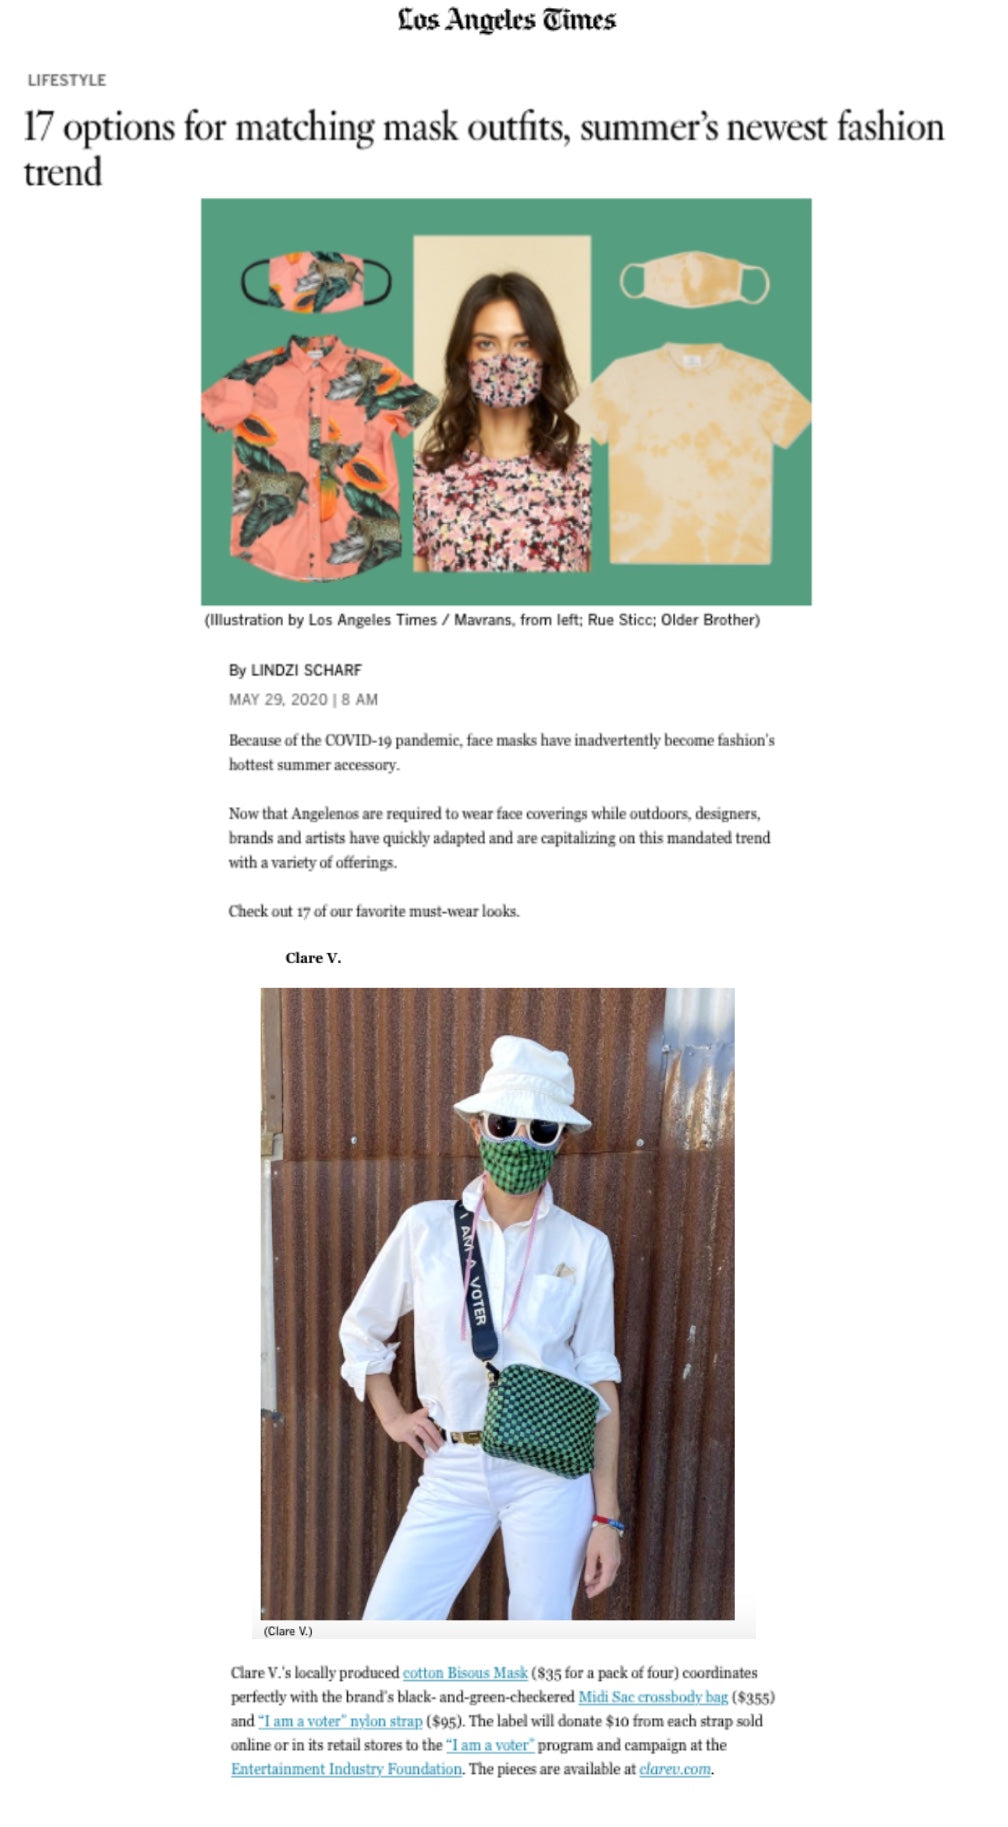 Los Angeles Times 17 Options For Matching Mask Outfits, Summer's Newest Fashion Trend Article Featuring Greta Wearing our Bisous Mask and Green and Black Woven Midi Sac